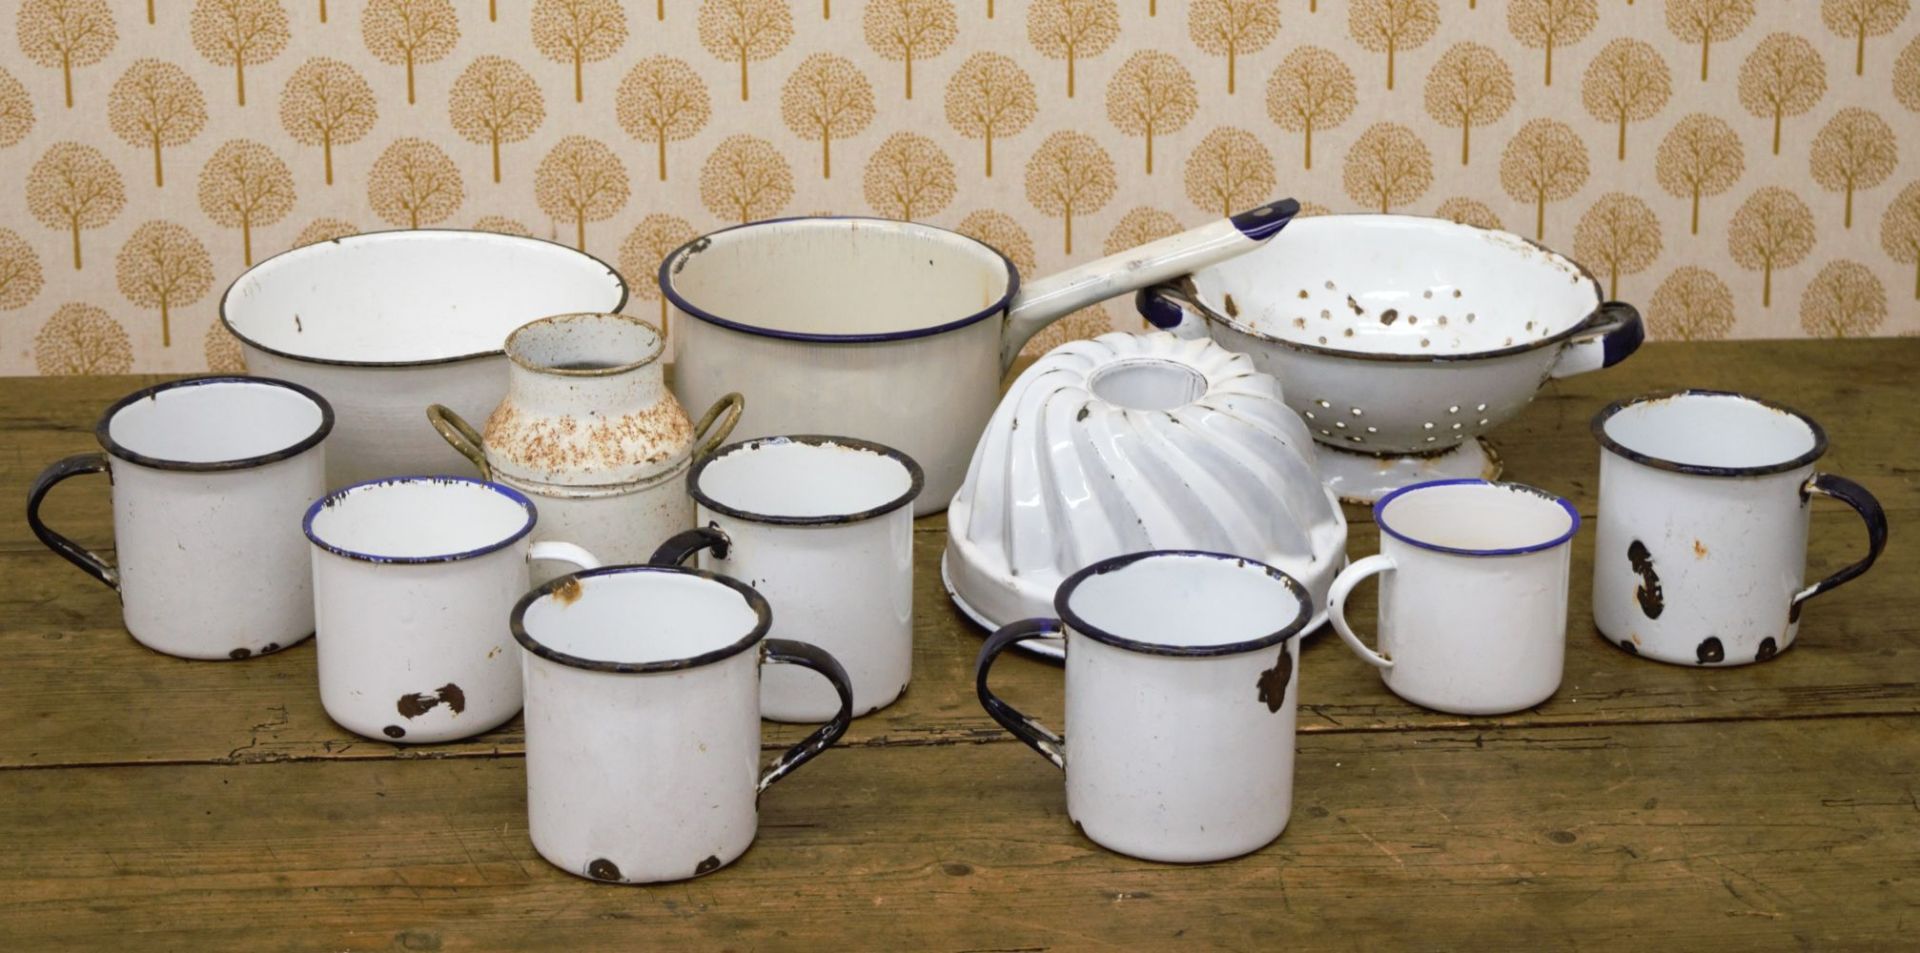 COLLECTION OF 19TH-CENTURY ENAMEL KITCHEN ITEMS